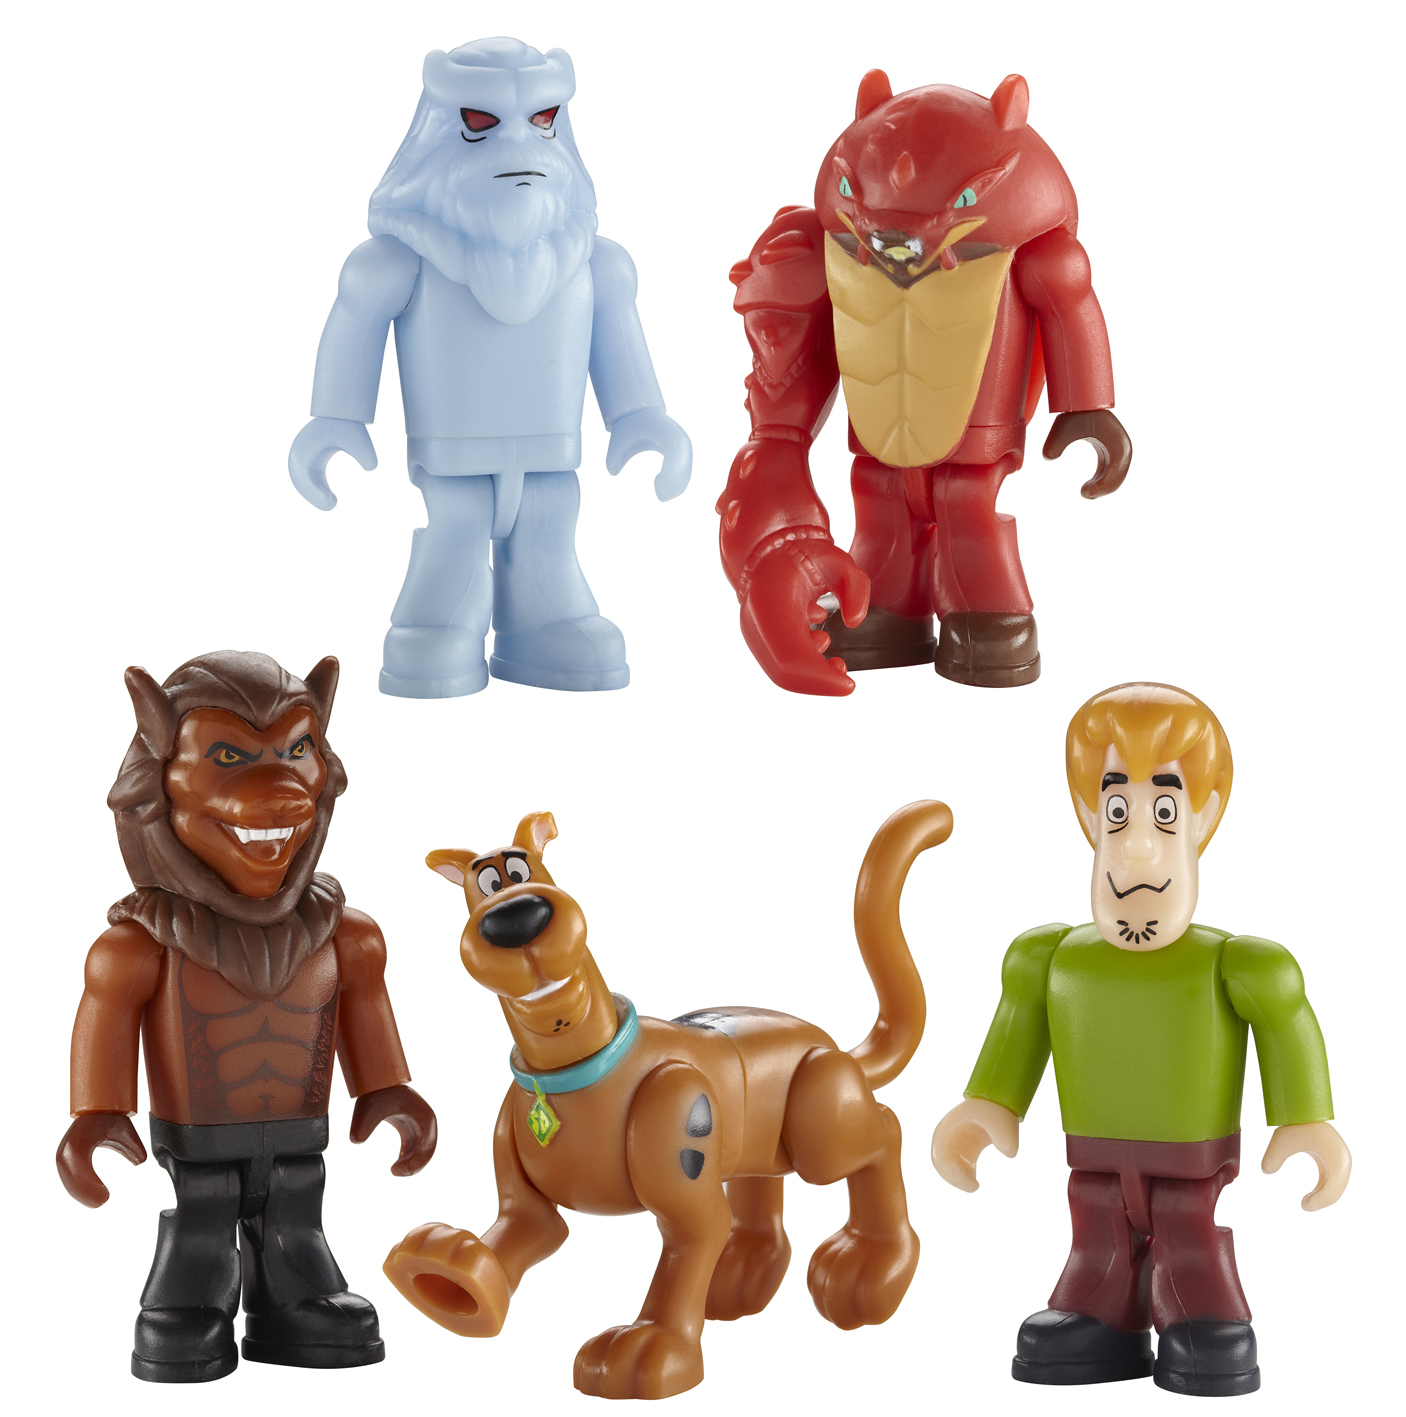 Scooby Doo 5 Pack - Pack 1